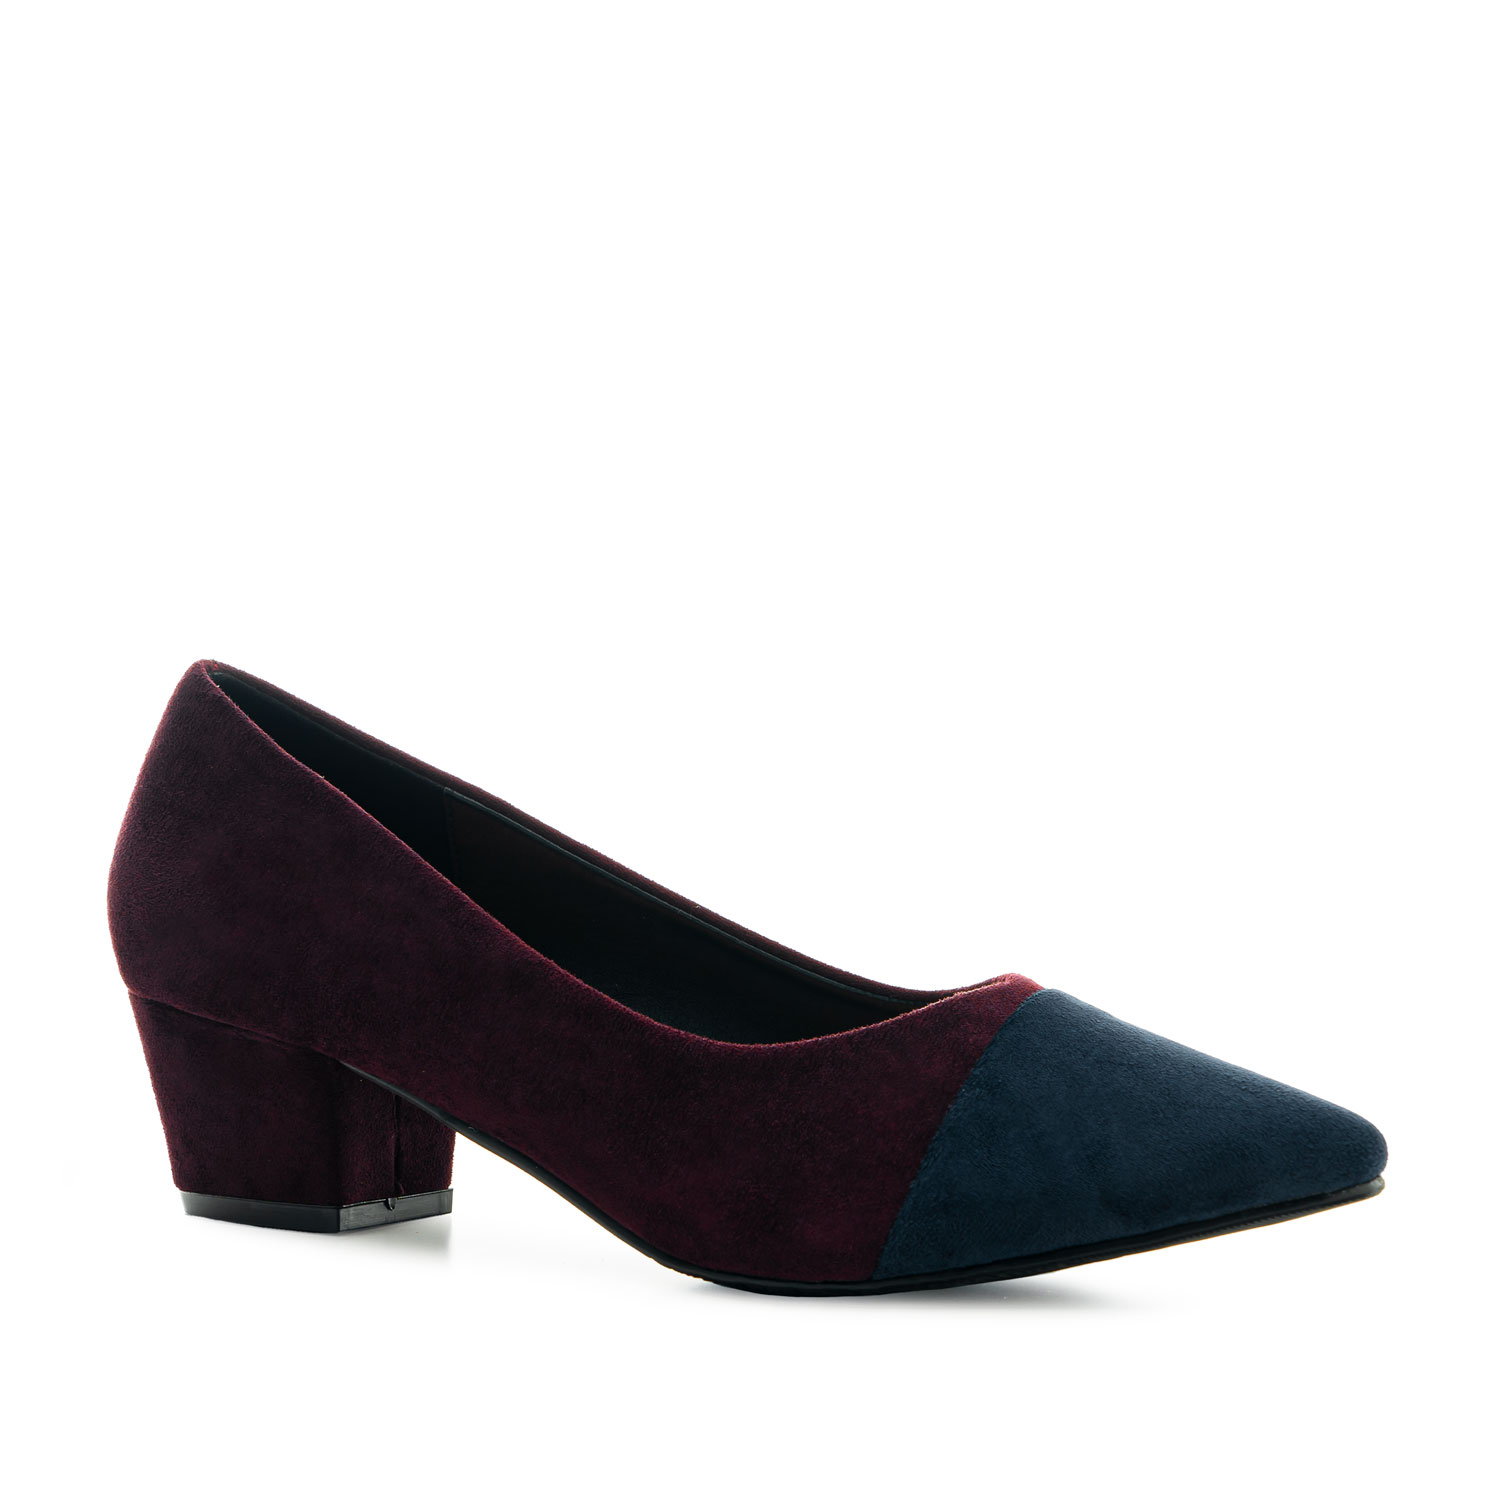 Toe Cap Court Shoes in Navy & Burgundy Suedette 